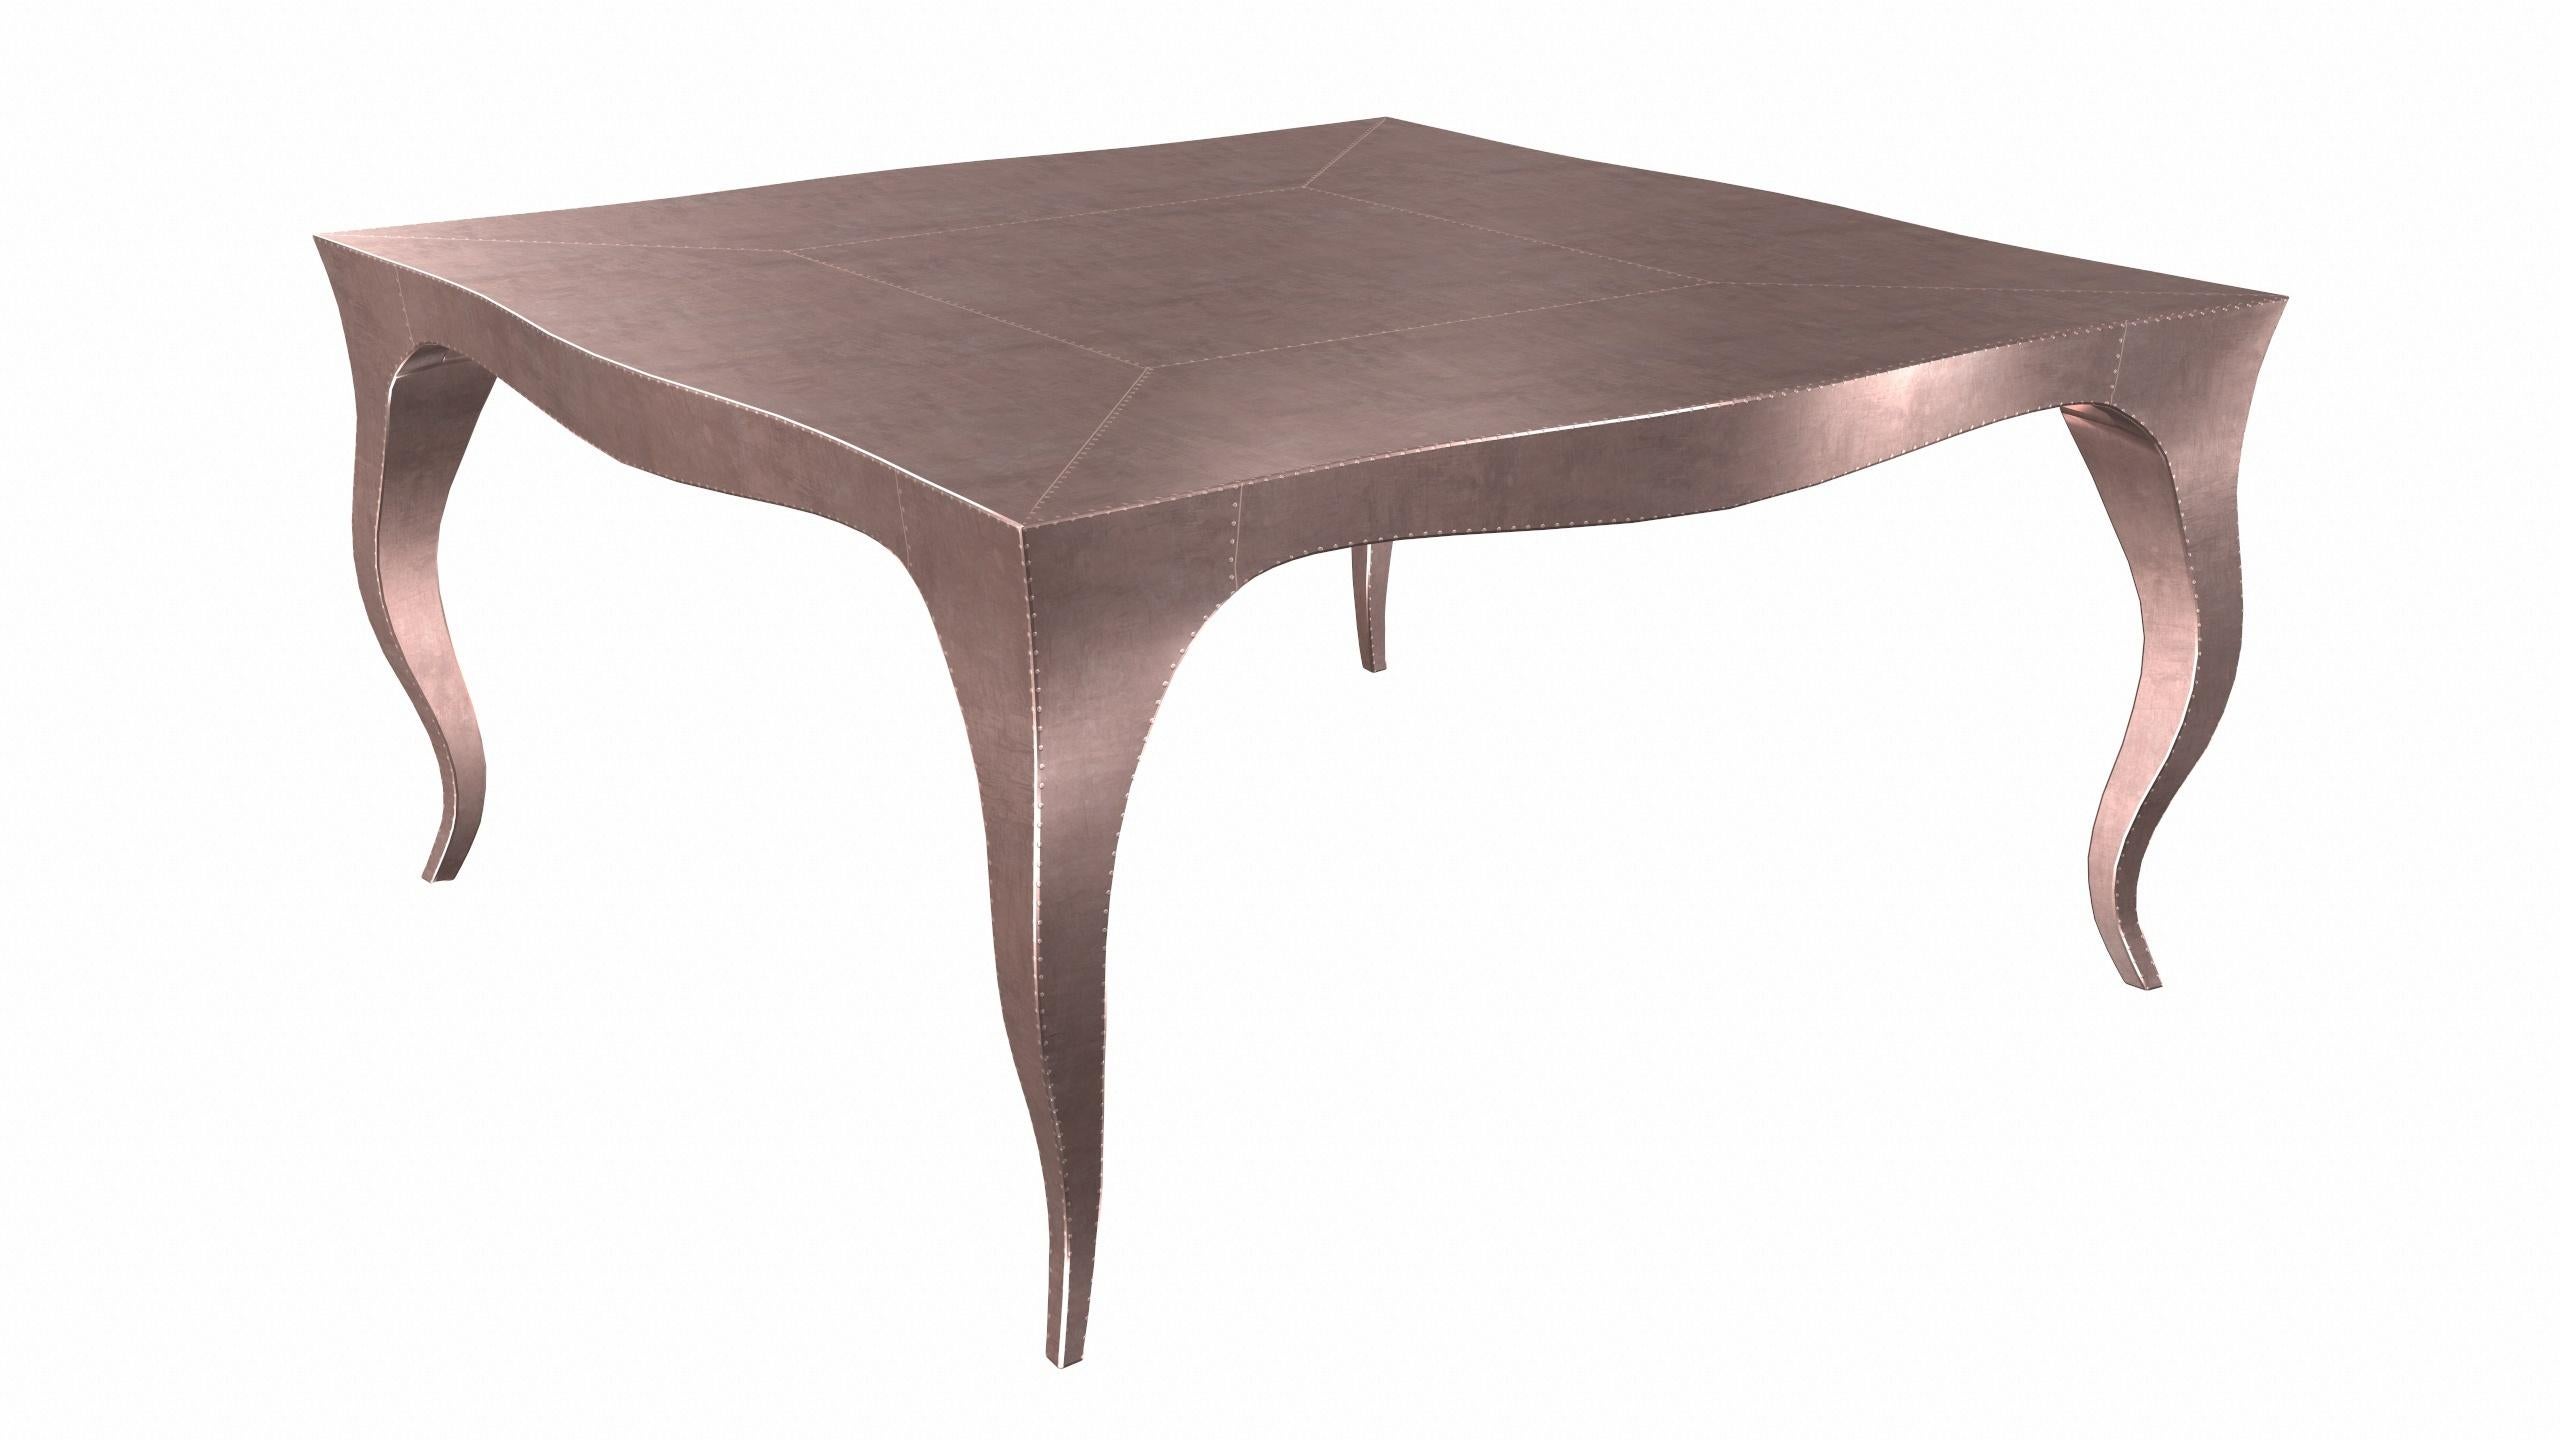 Metal Louise Art Decor Nesting Tables Smooth Copper 18.5x18.5x10 inch by Paul M. For Sale